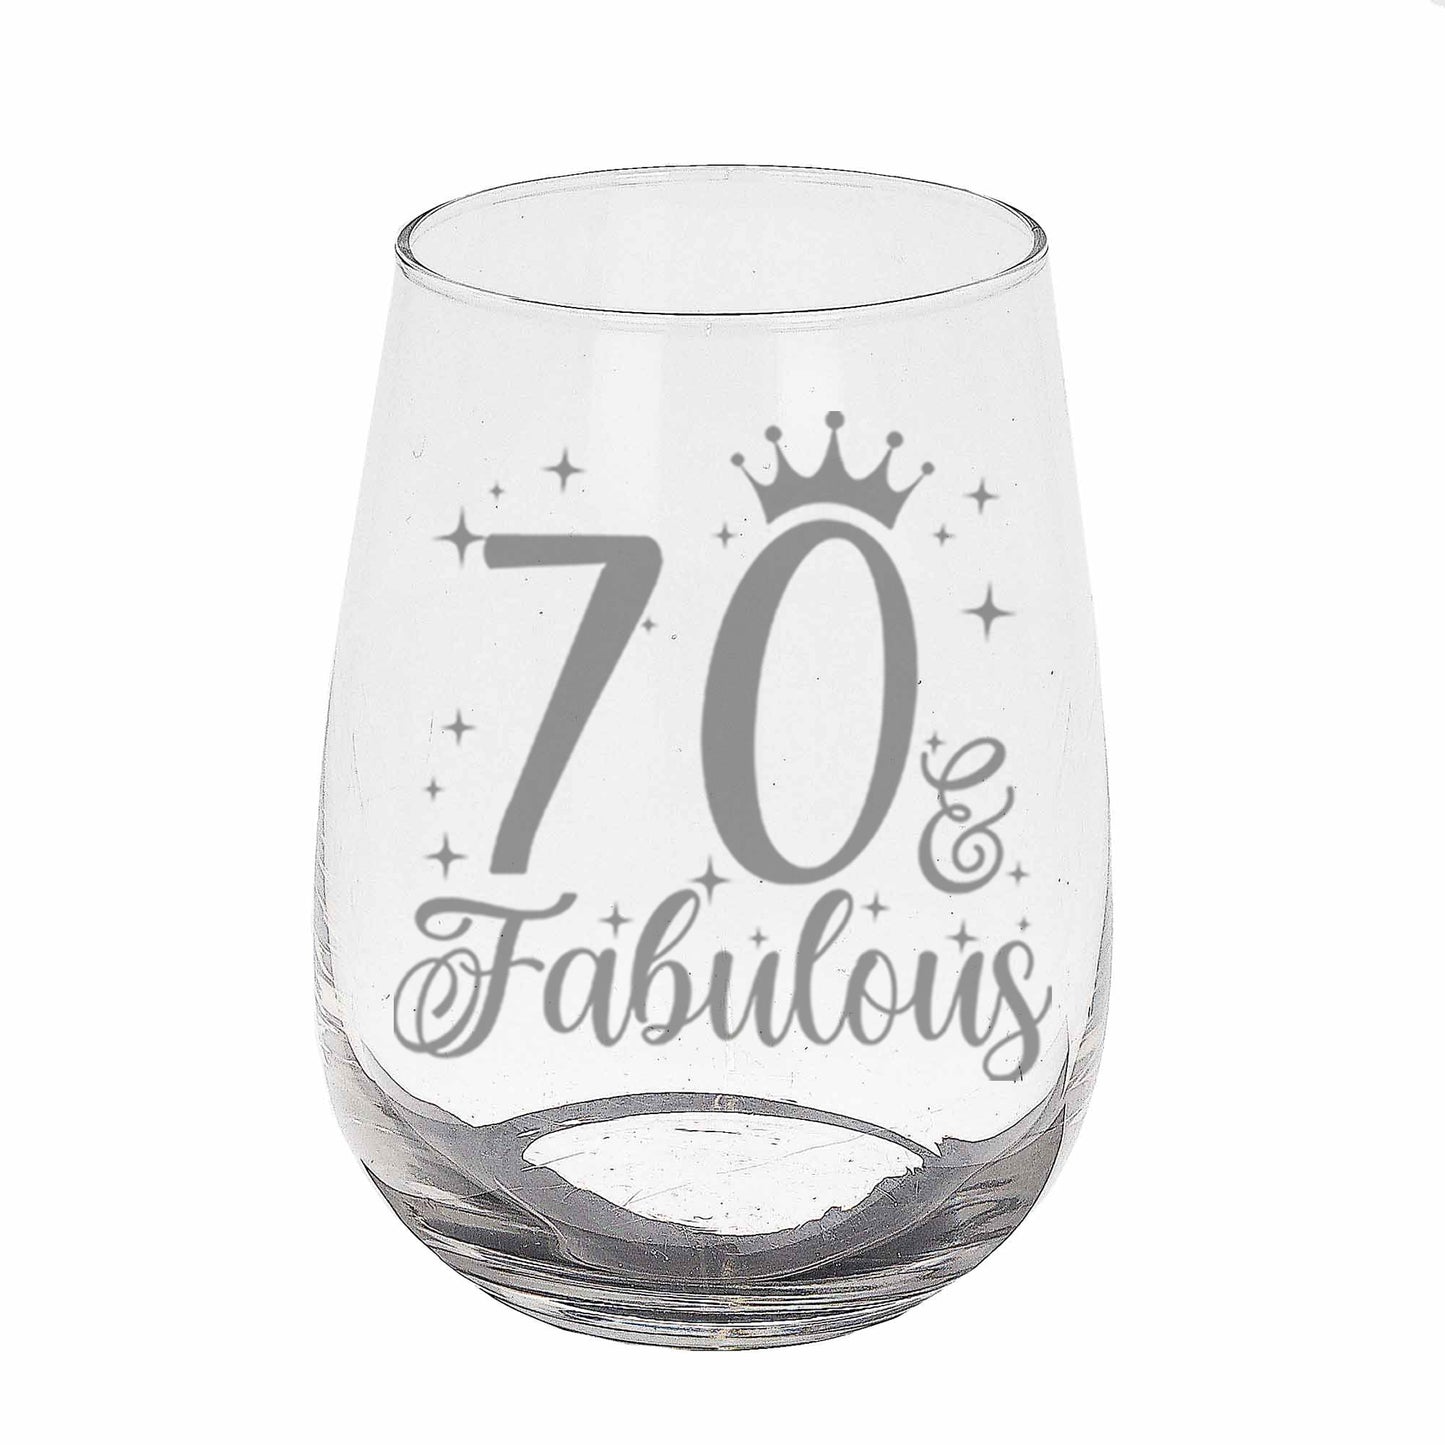 70 & Fabulous Engraved Stemless Gin Glass and/or Coaster Set  - Always Looking Good - Stemless Gin Glass On Its Own  